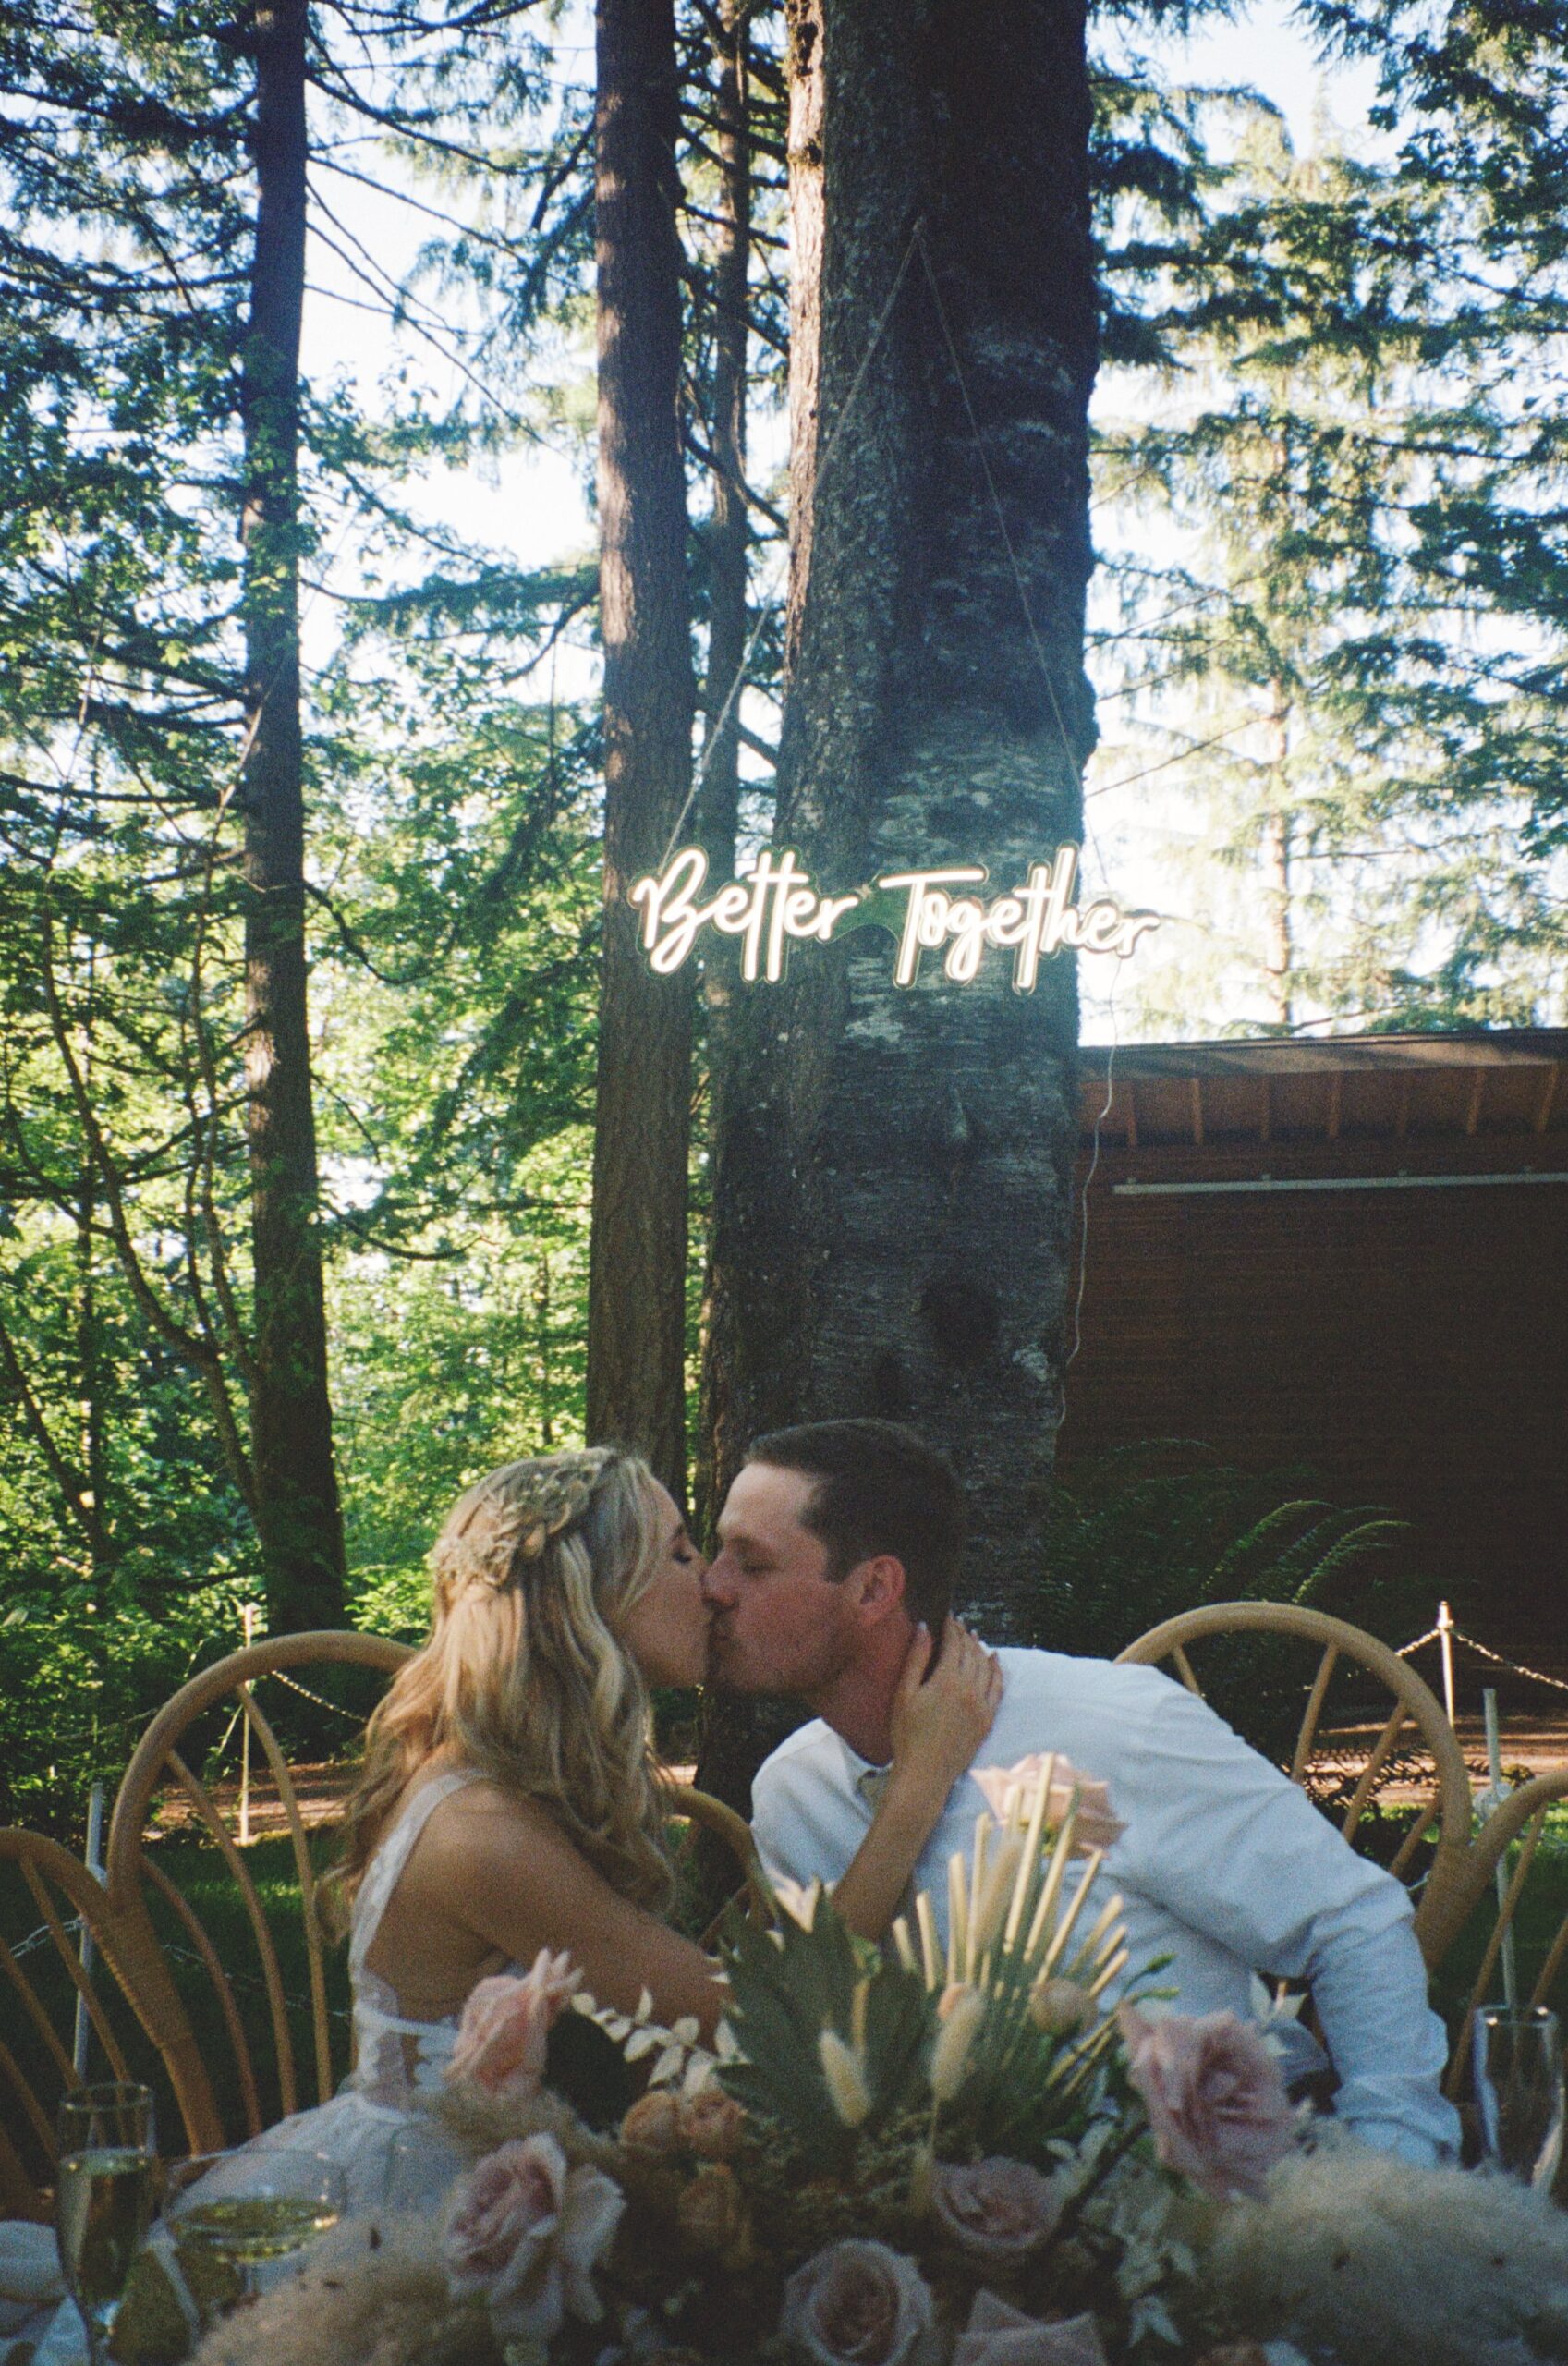 Bride and groom kissing at wedding table with better together sign in background. Oregon Wedding photographer, film photography